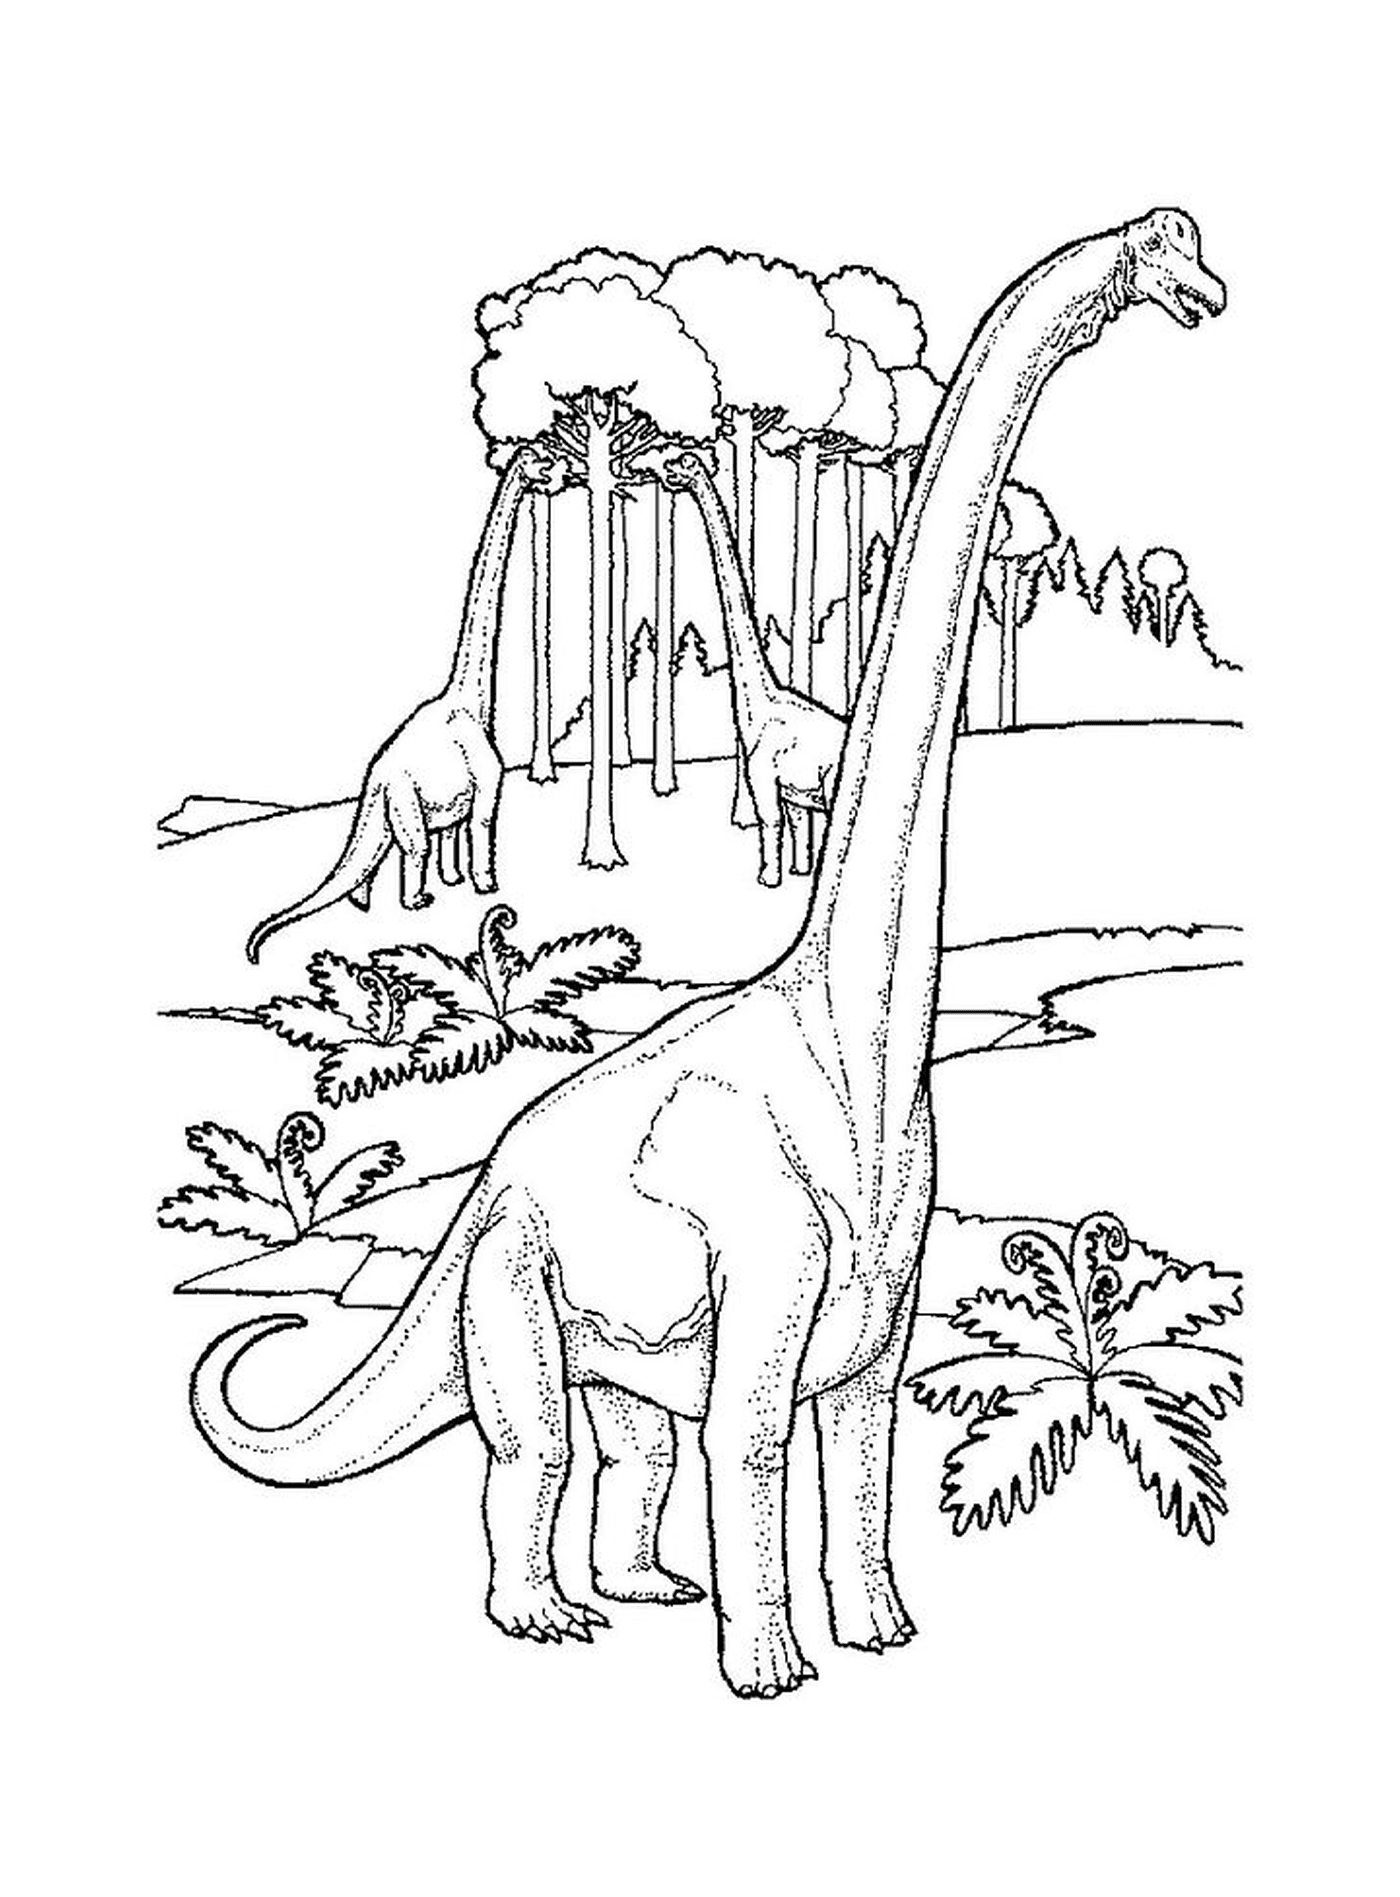  An adult dinosaur in the jungle 